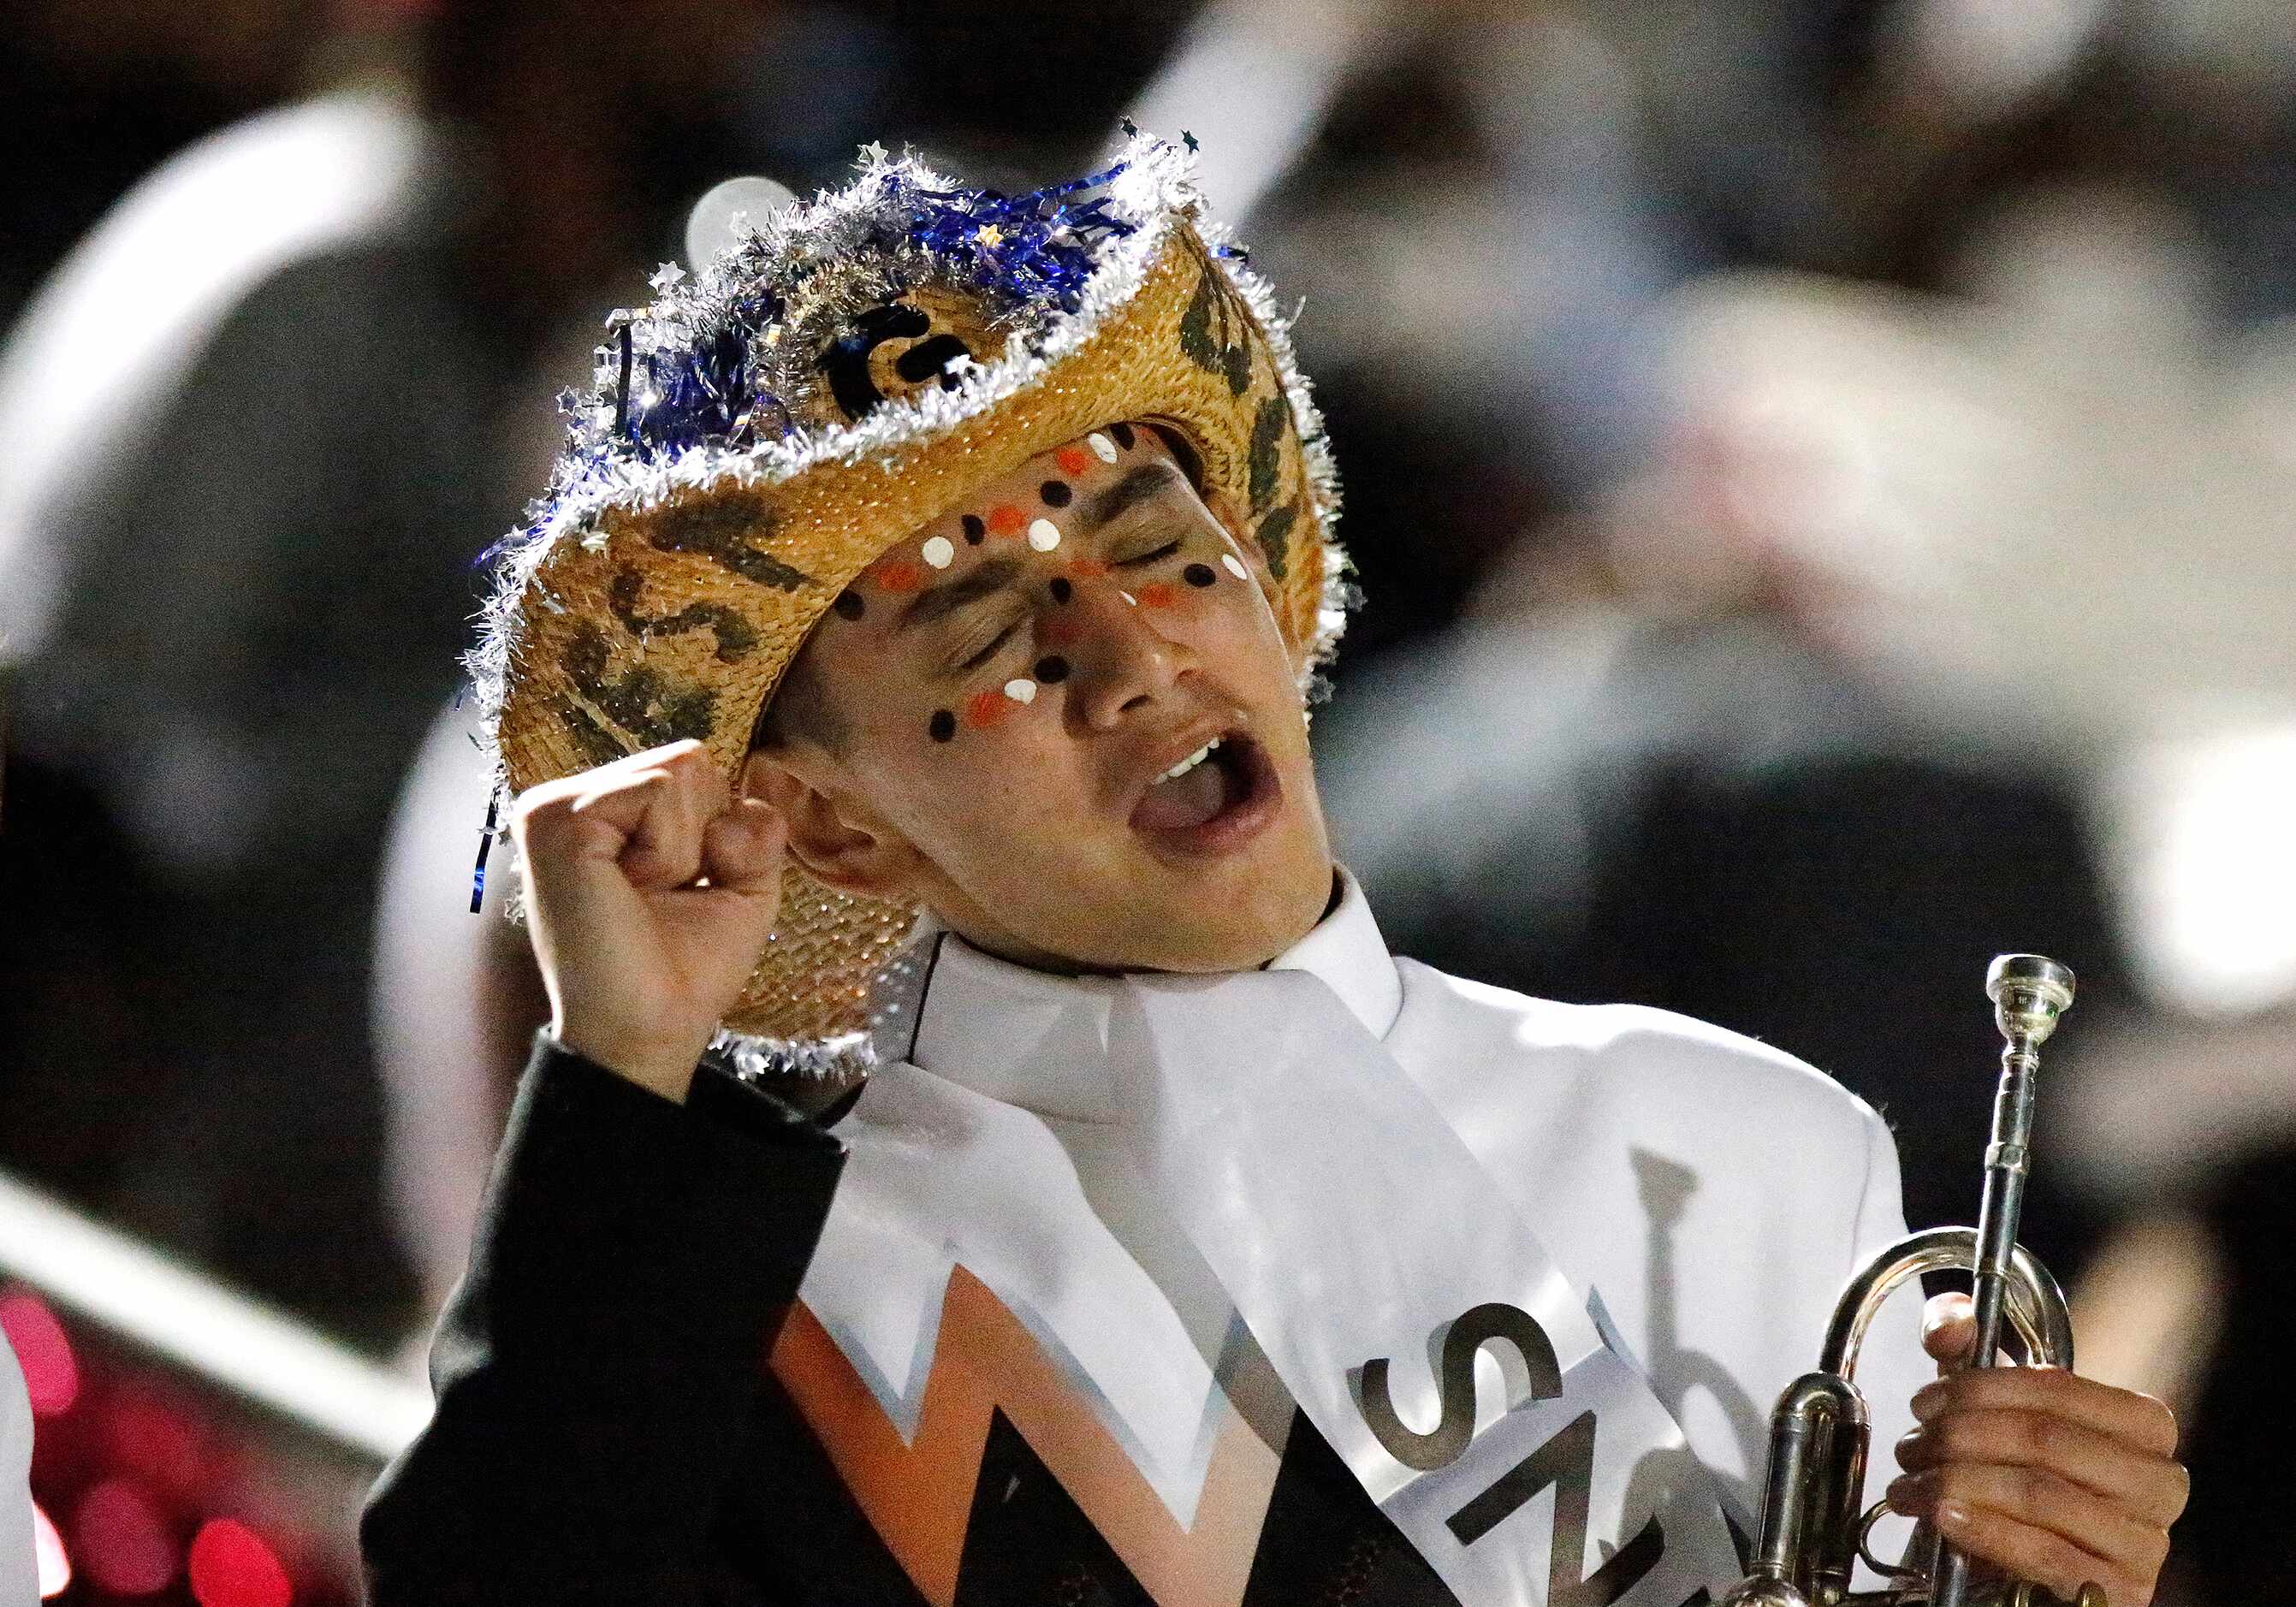 West Mesquite marching band member Gio Lumas, 17, holds his trumpet while cheering his team...